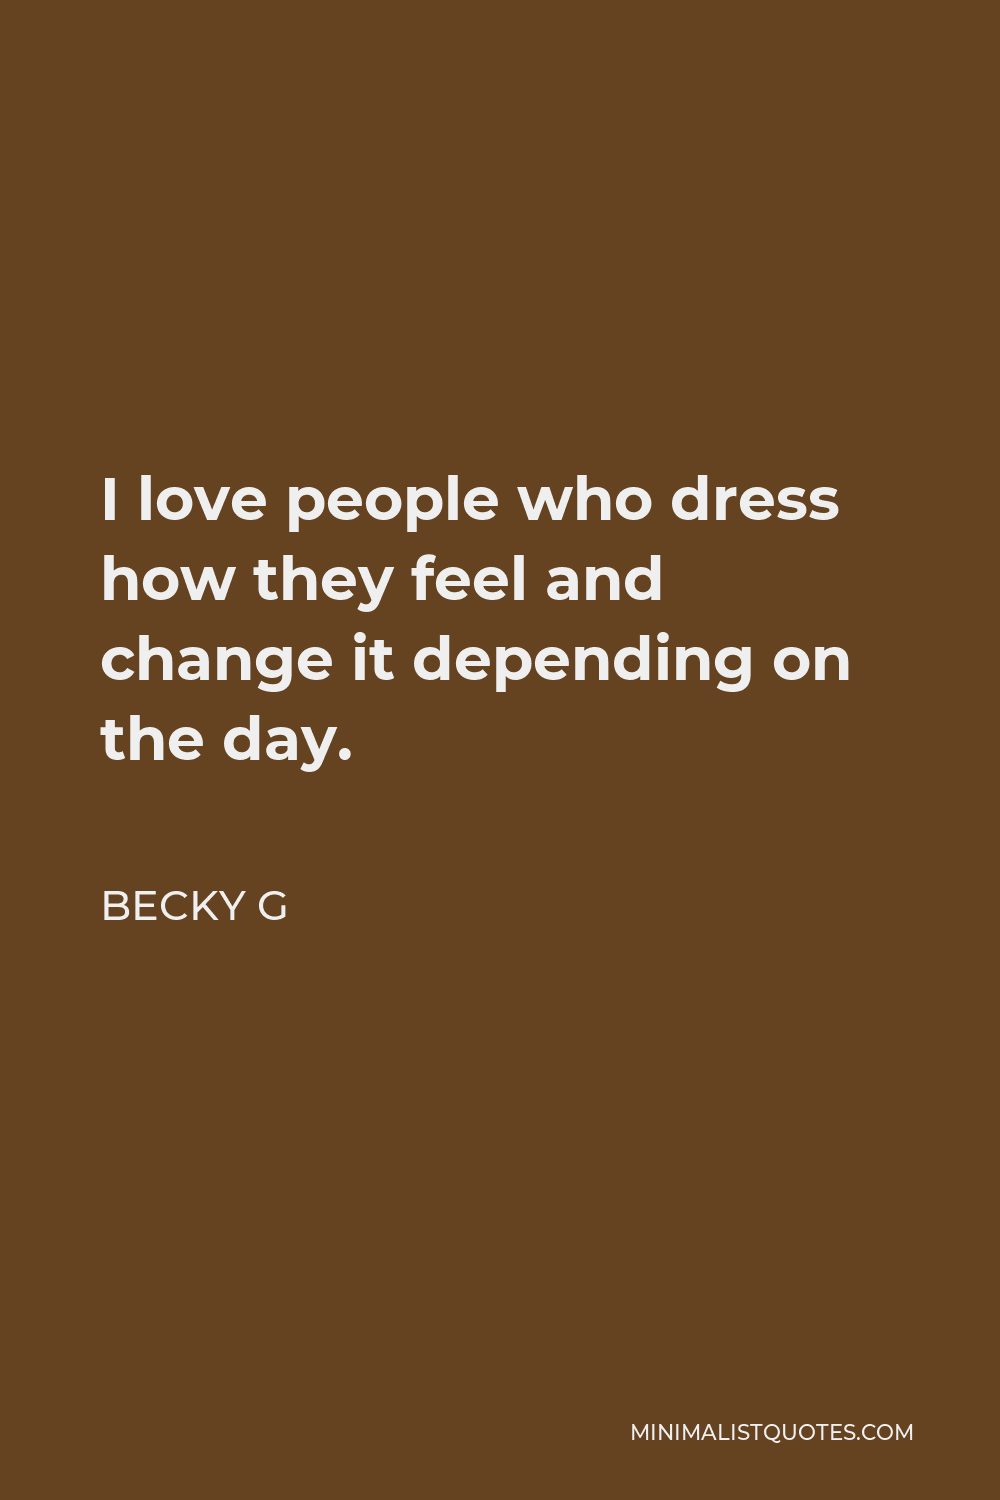 Becky G Quote - I love people who dress how they feel and change it depending on the day.